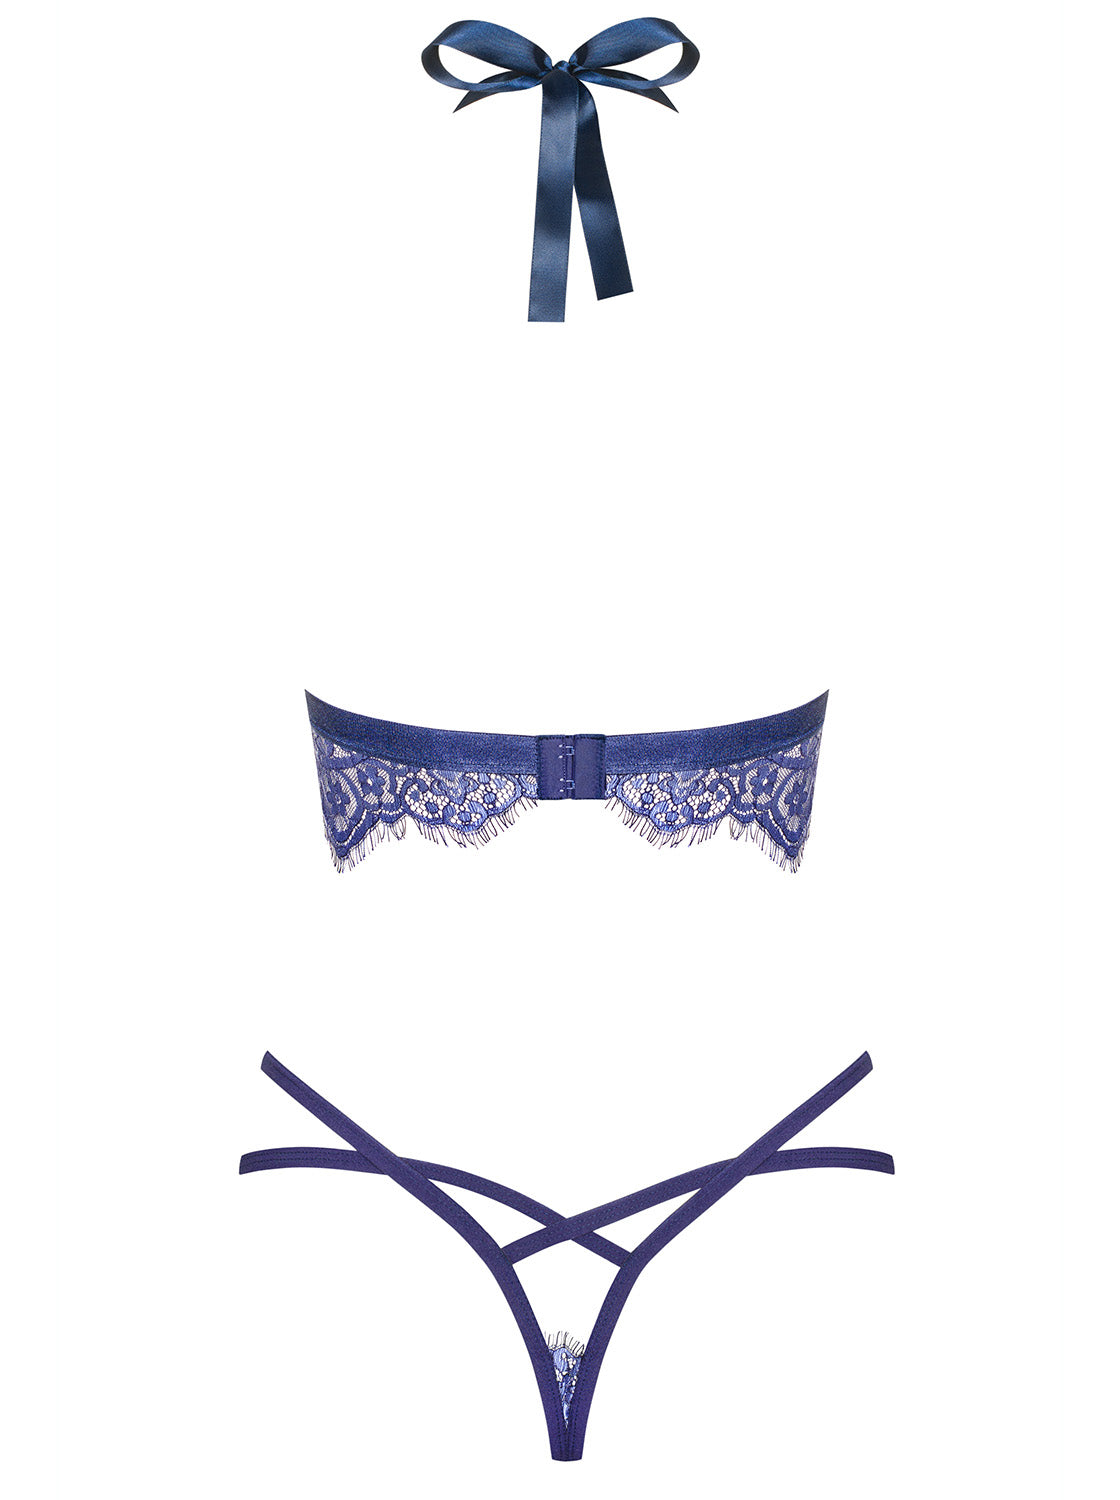 Flowlace a charming set a top with padded cups and a matching lace thong with eyelash lace